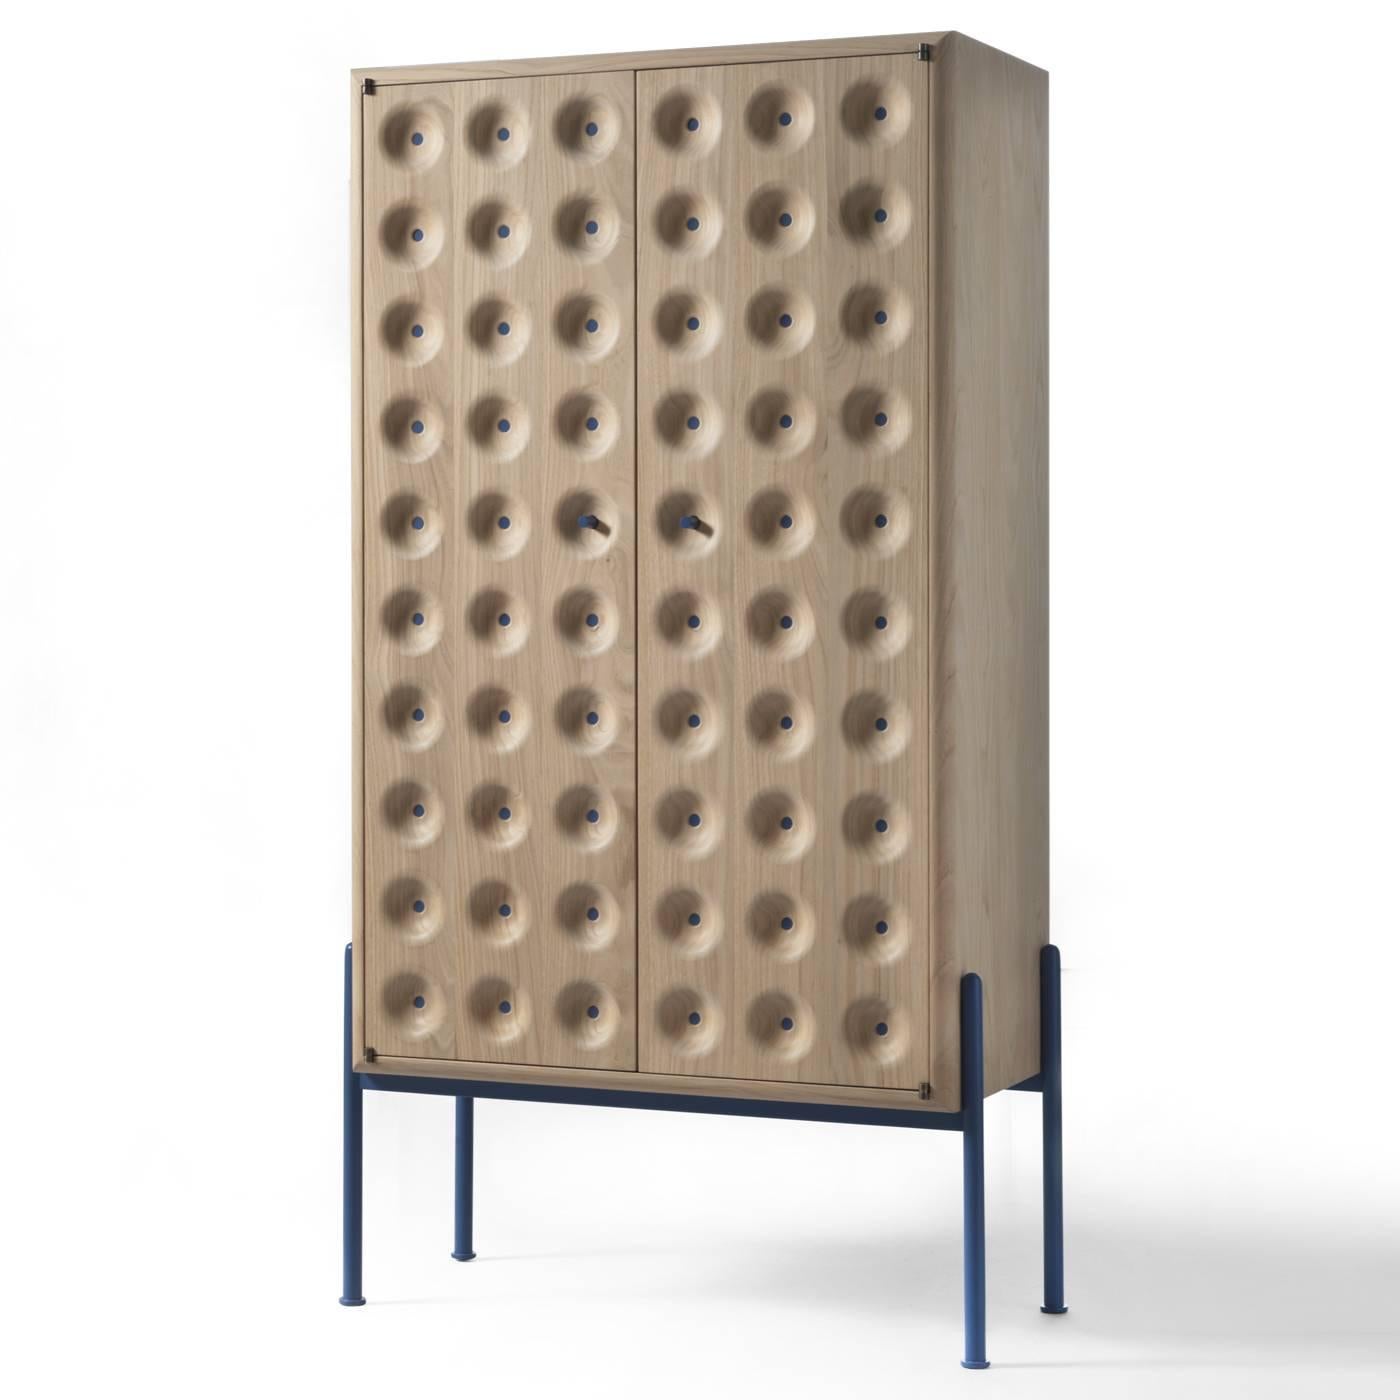 This exquisite cabinet has a skin-like surface whose texture invites a tactile experience. The Minimalist legs in iron varnished in pale blue support an imposing two-door cabinet in chestnut wood. The handles are in iron with the same pale blue